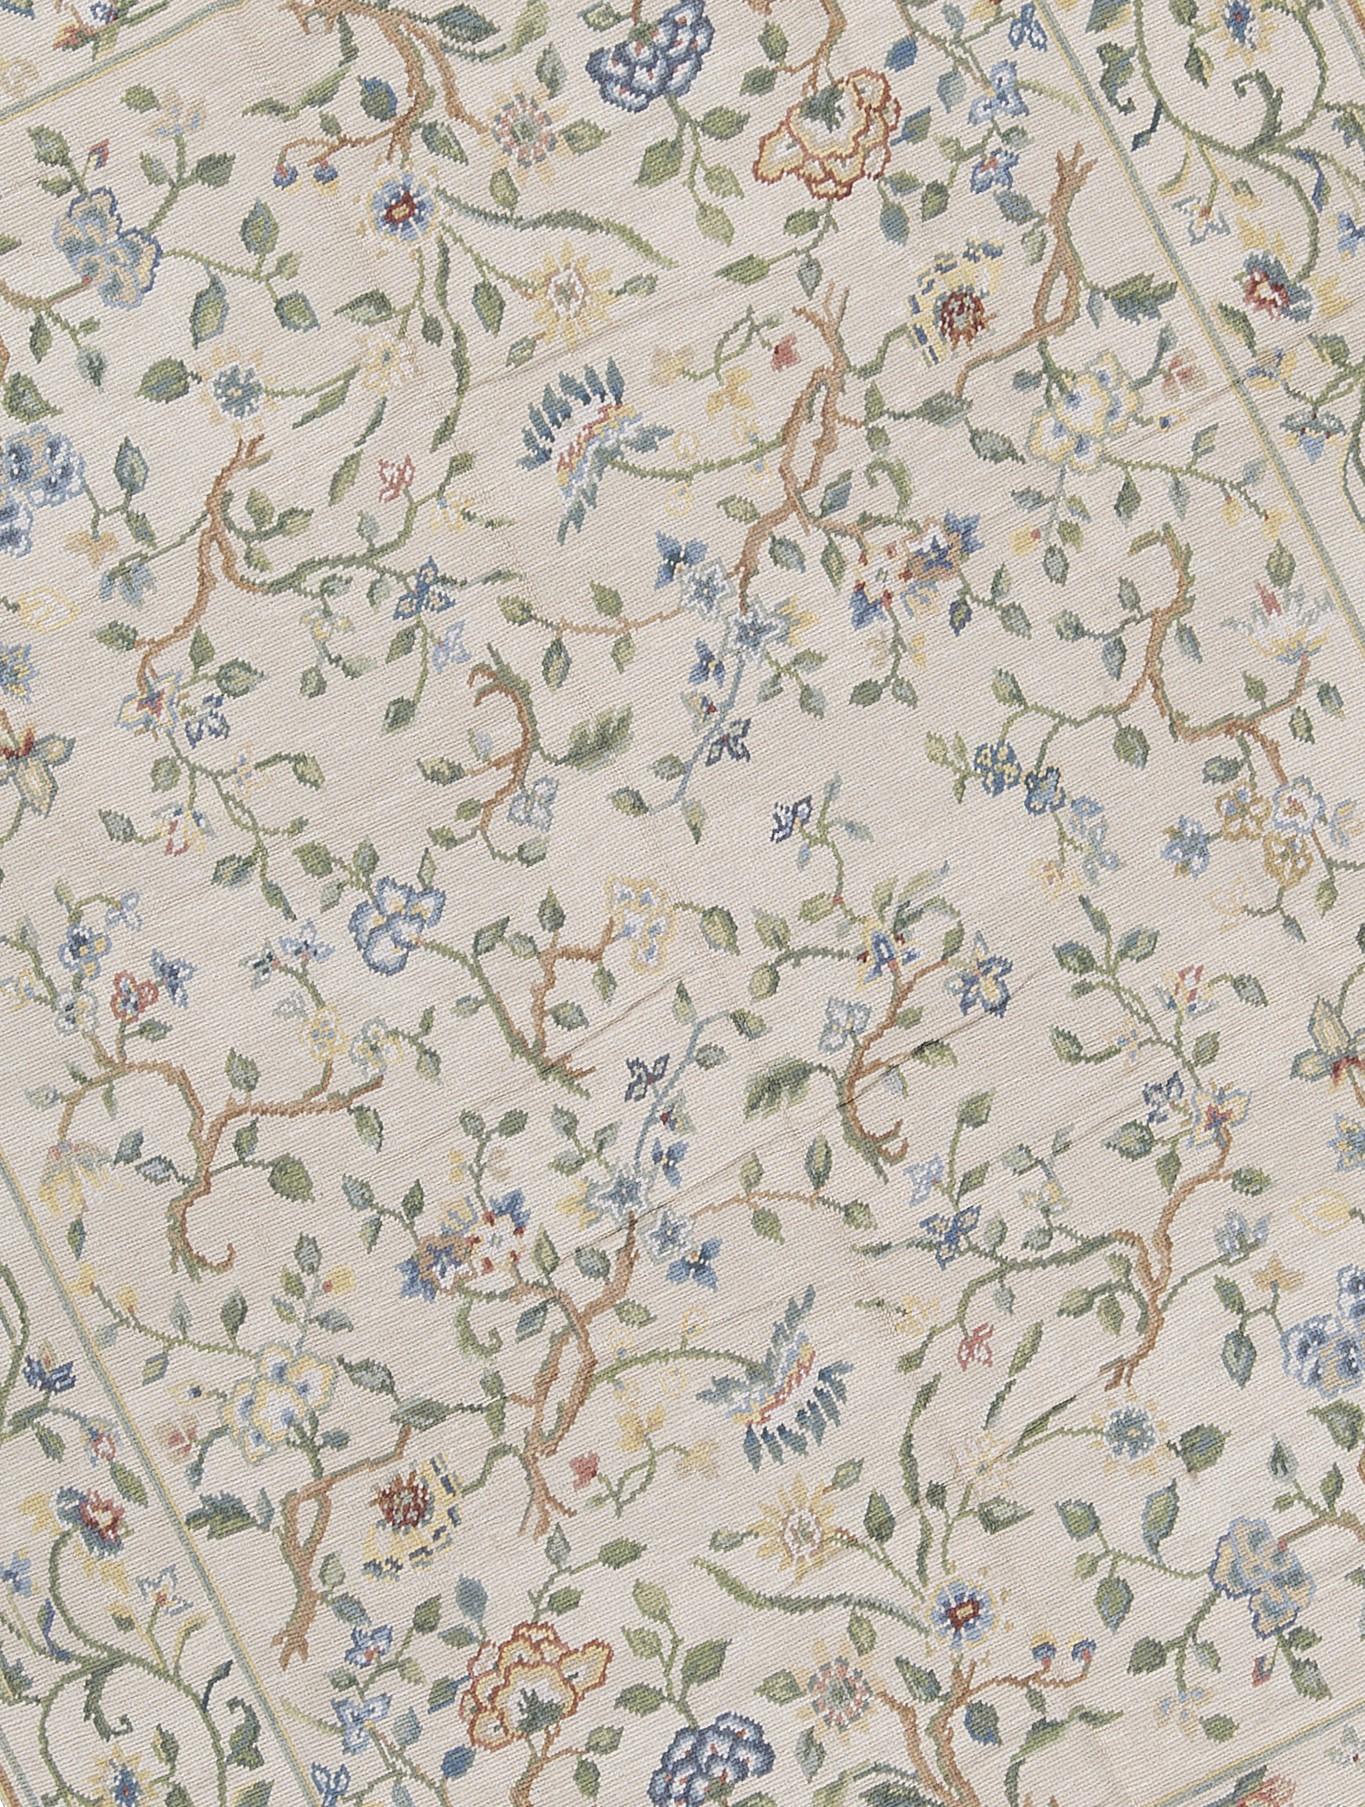 Inspired by the Tuscan countryside, caramel branches with olive green leaves and flowers in navy, powder blue, pale and golden yellows, are surrounded by a vine and flower border that rests on an variegated egg shell and oatmeal, beige ground. Size